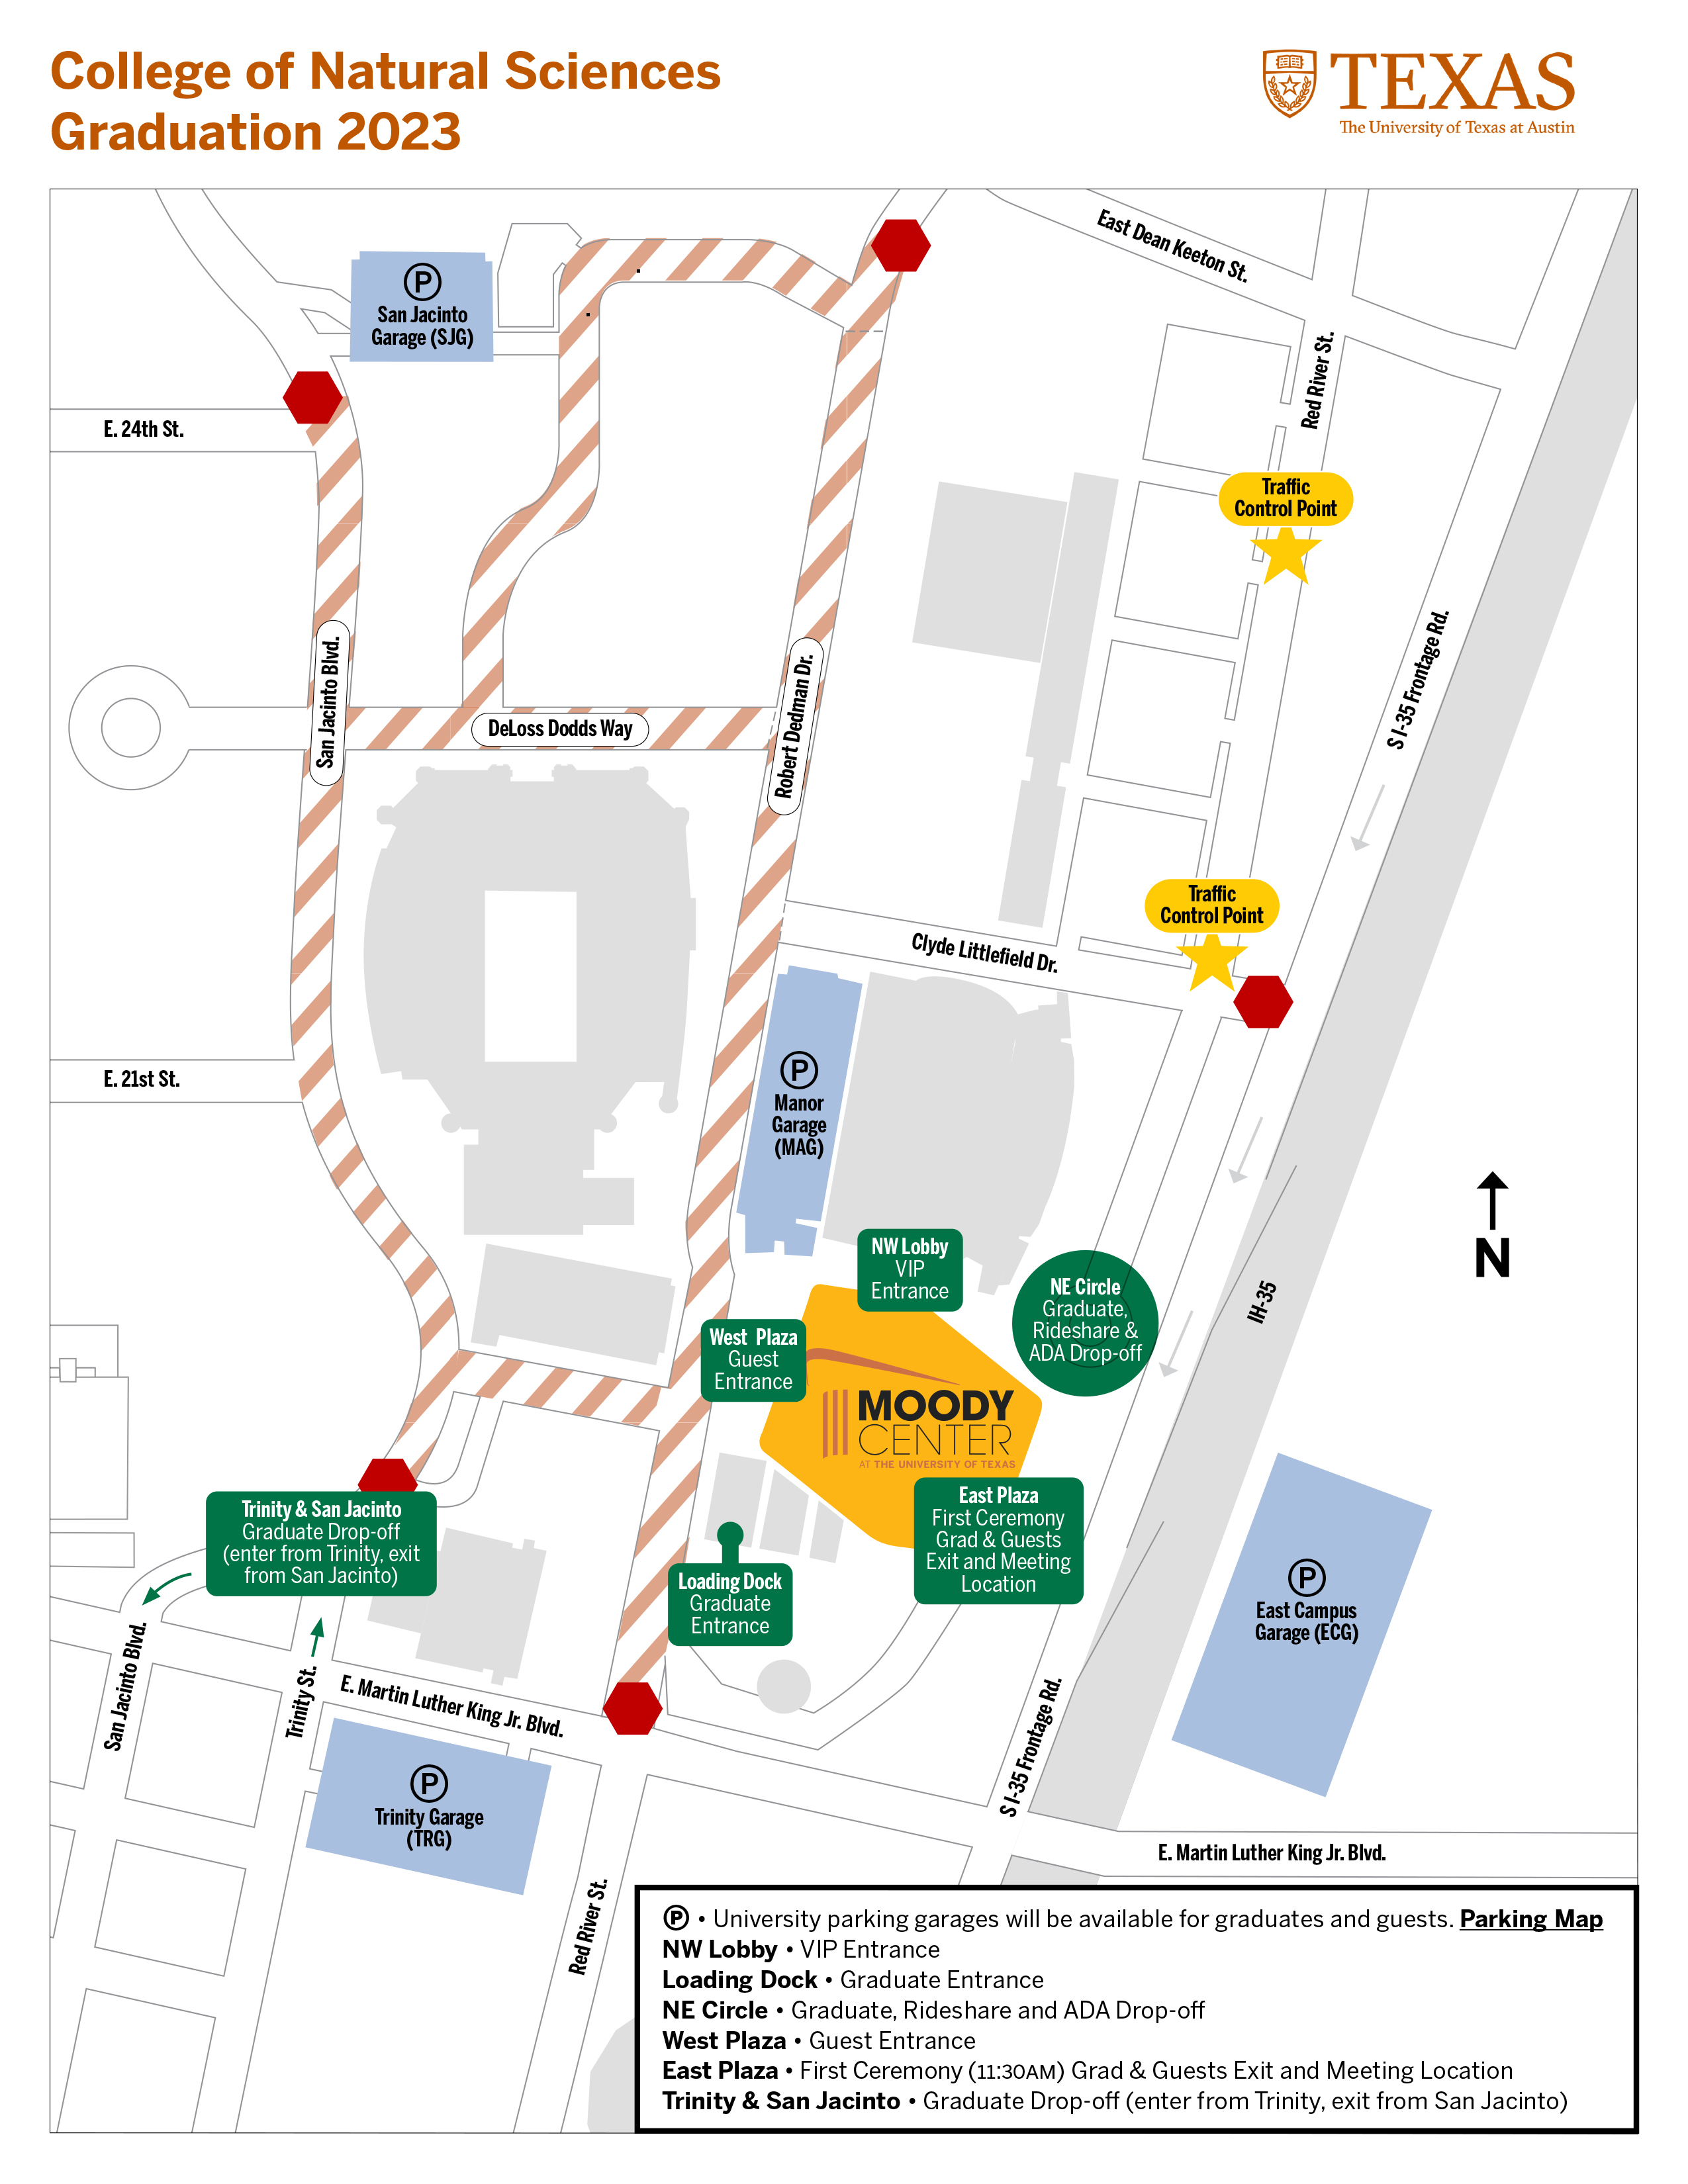 Map for graduation events. Graduate drop-off at Trinity St. and San Jacinto Blvd. Graduate Entrance at Loading Dock near E MLK Jr. Blvd and Robert Dedman Drive. Guest entrance at west side of Moody Center on Robert Dedman Drive. Graduate/Rideshare/ADA Drop-off on northeast side of Moody Center at NE Circle on Red River St. VIP entrance at NW lobby of Moody Center. After the ceremony, please exit toward East Plaza.